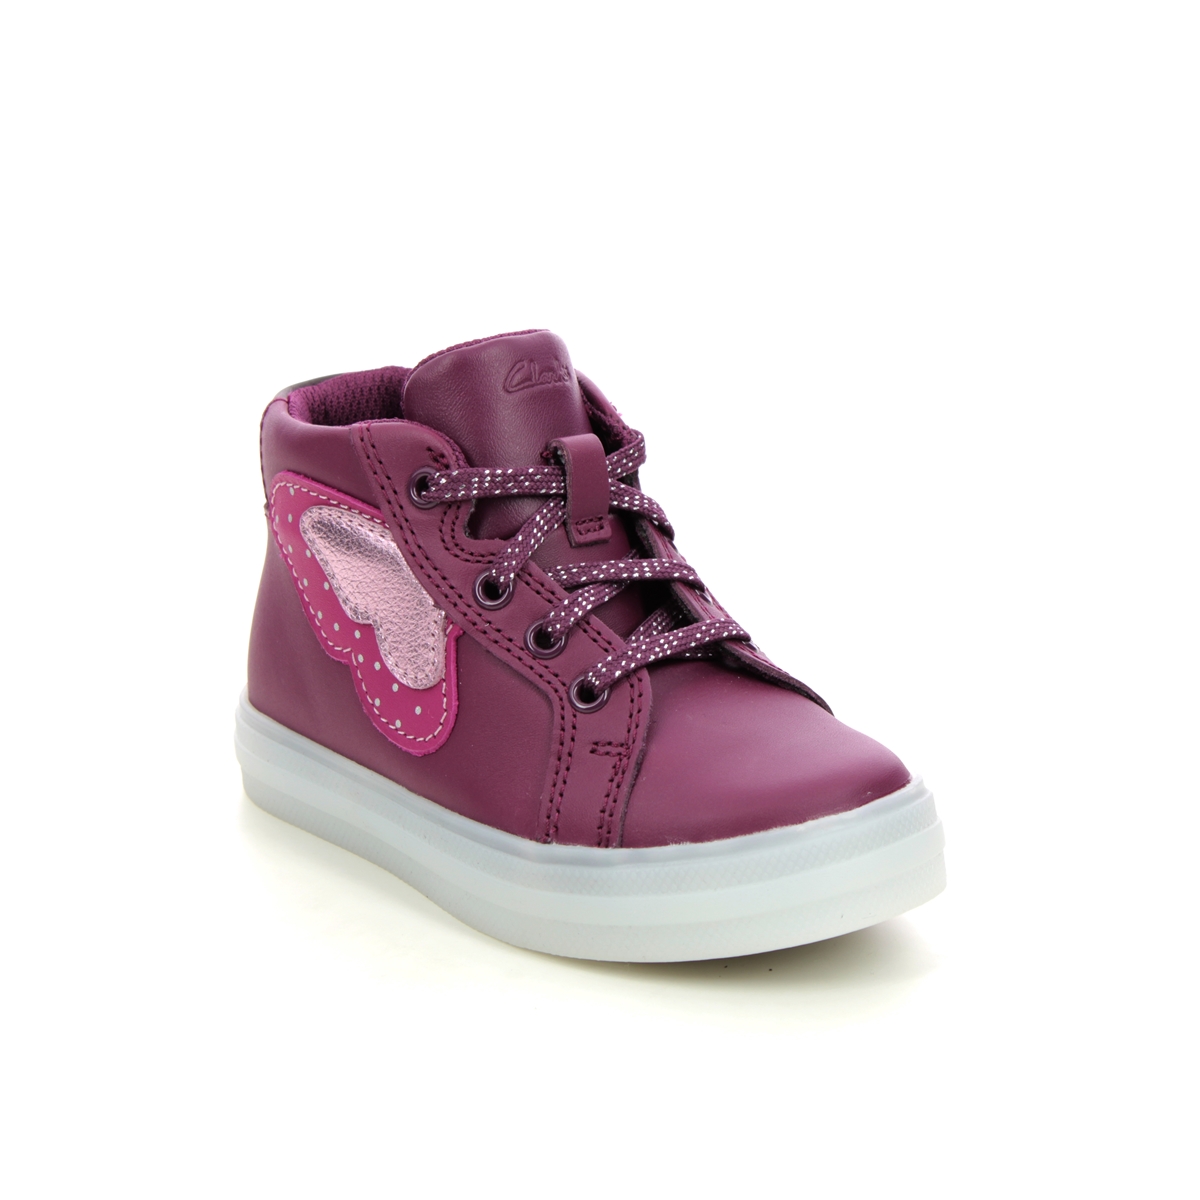 Clarks Flare Sparky T Plum Leather Kids Toddler Girls Boots 6194-47G in a Plain Leather in Size 6.5